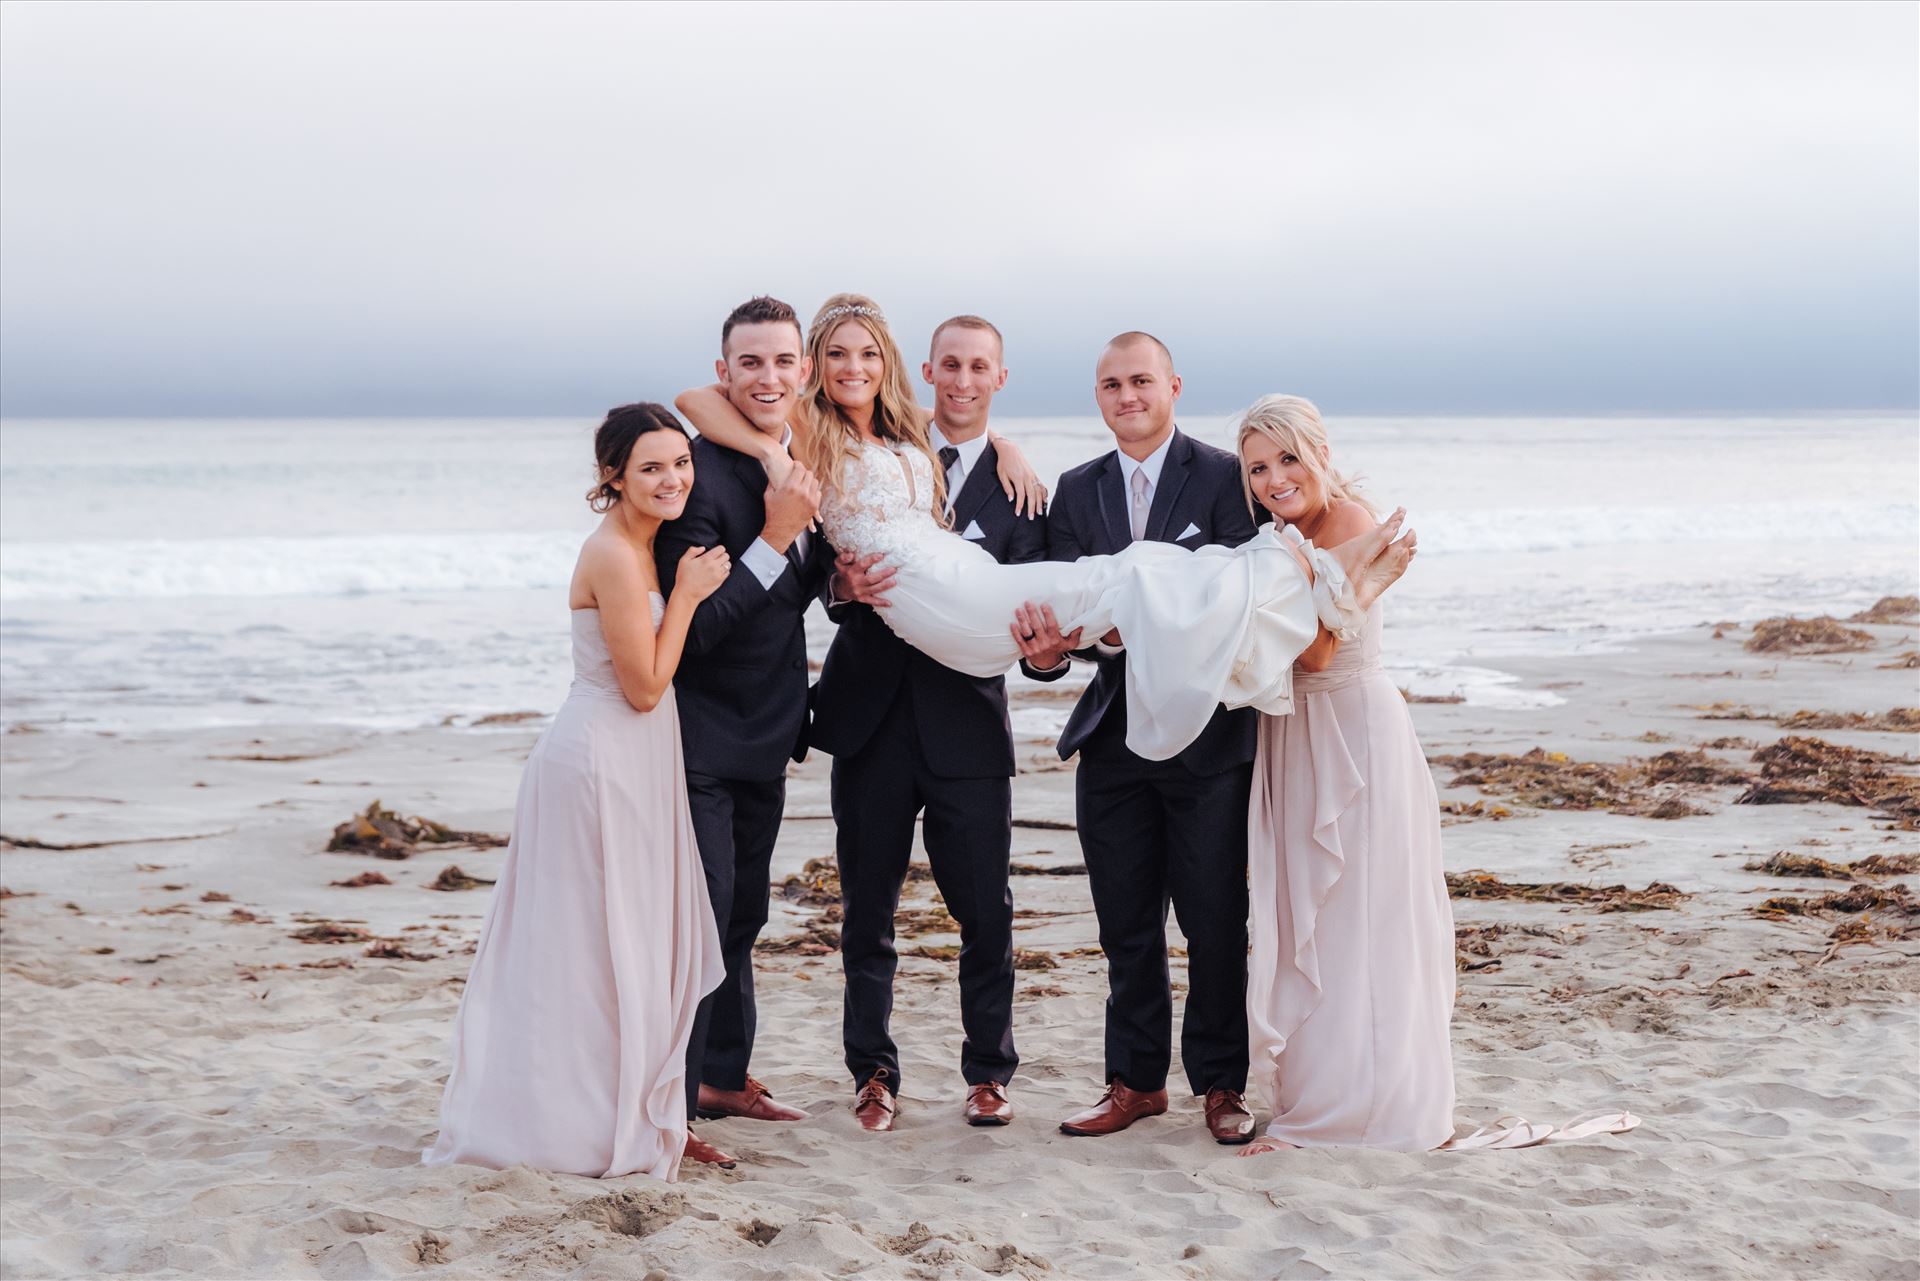 Courtney and Doug 66 - Mirror's Edge Photography, San Luis Obispo Wedding Photographer captures Cayucos Wedding on the beach and bluffs in Cayucos Central California Coast. Wedding Party Bridal Party at the Beach by Sarah Williams